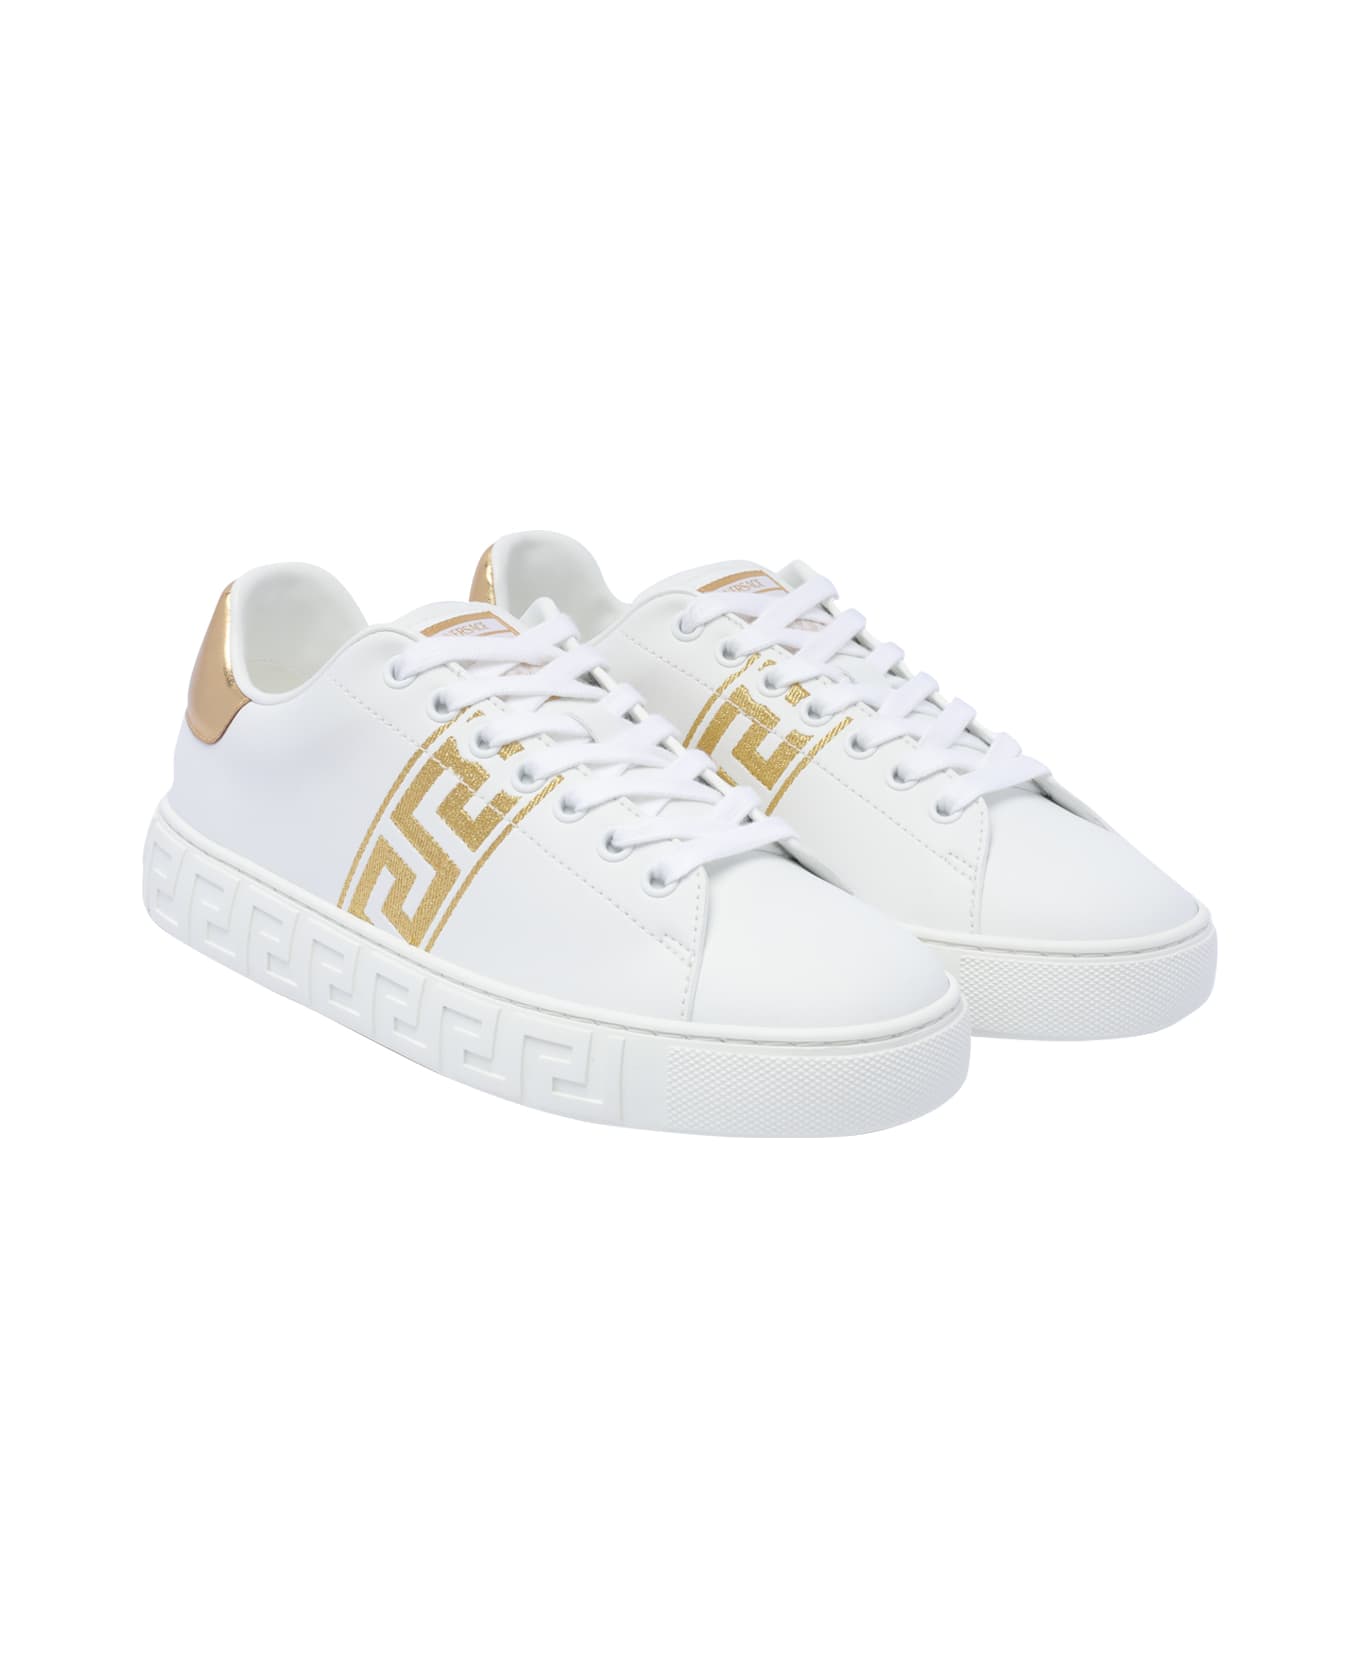 Versace Greca Embroidered Sneakers - White スニーカー